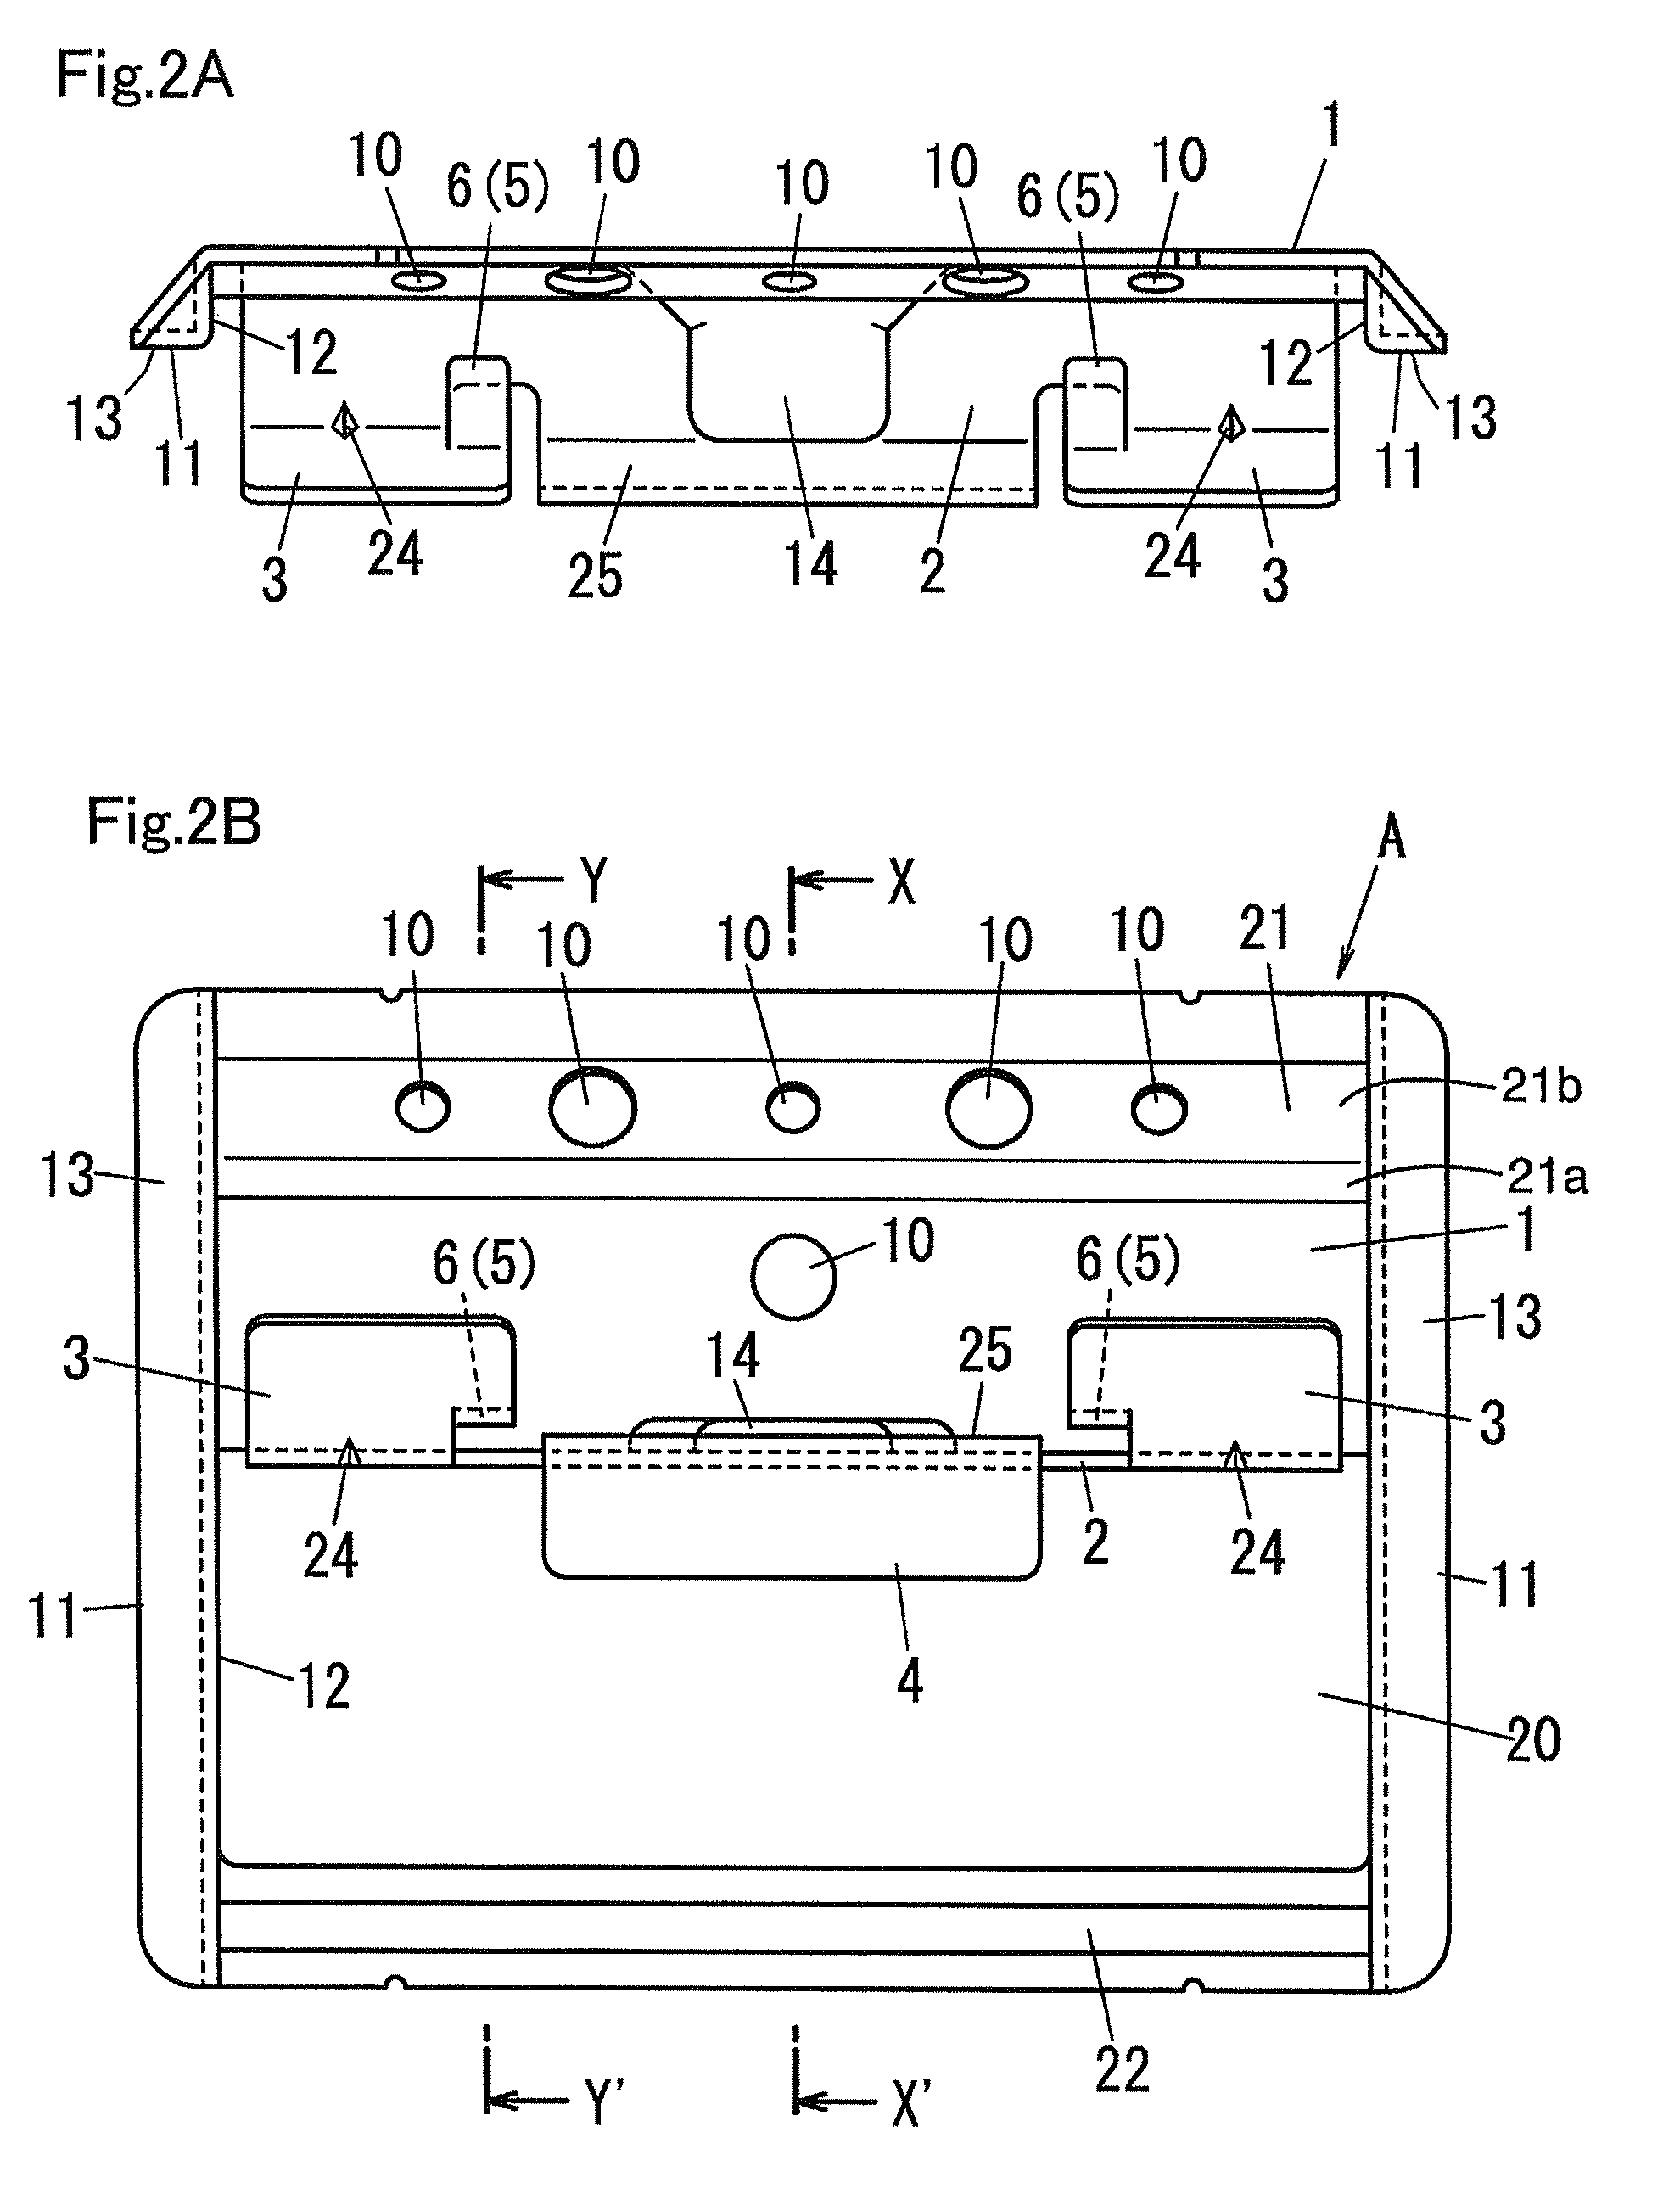 External material clamp and external material clamping structure